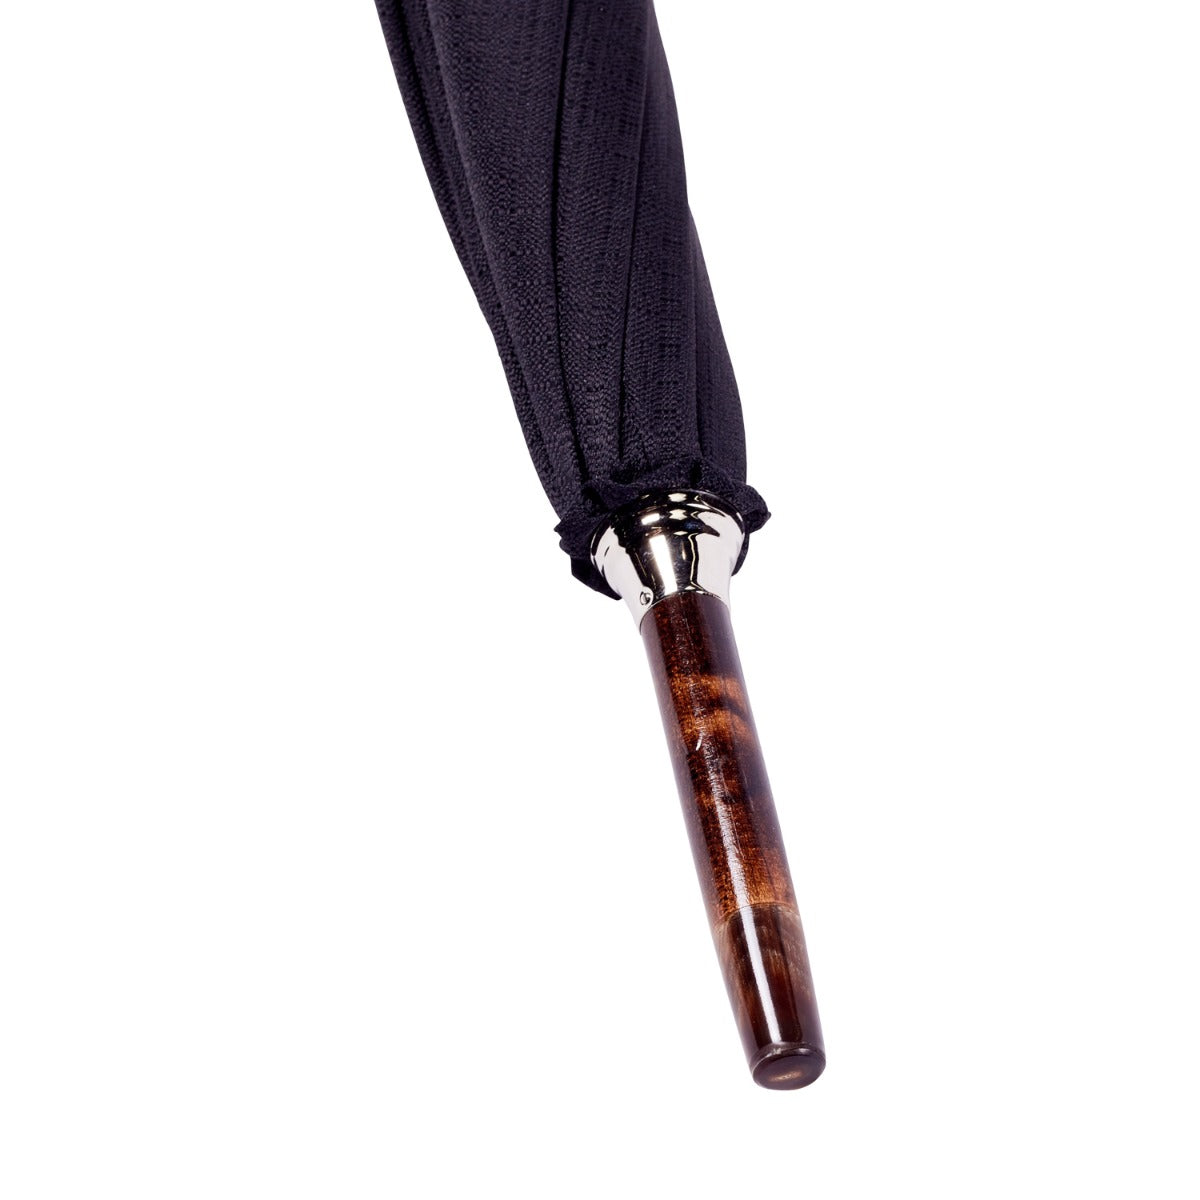 A Shiny Tiger Maple Handle w/ Imperial Black Canopy umbrella, designed by KirbyAllison.com.